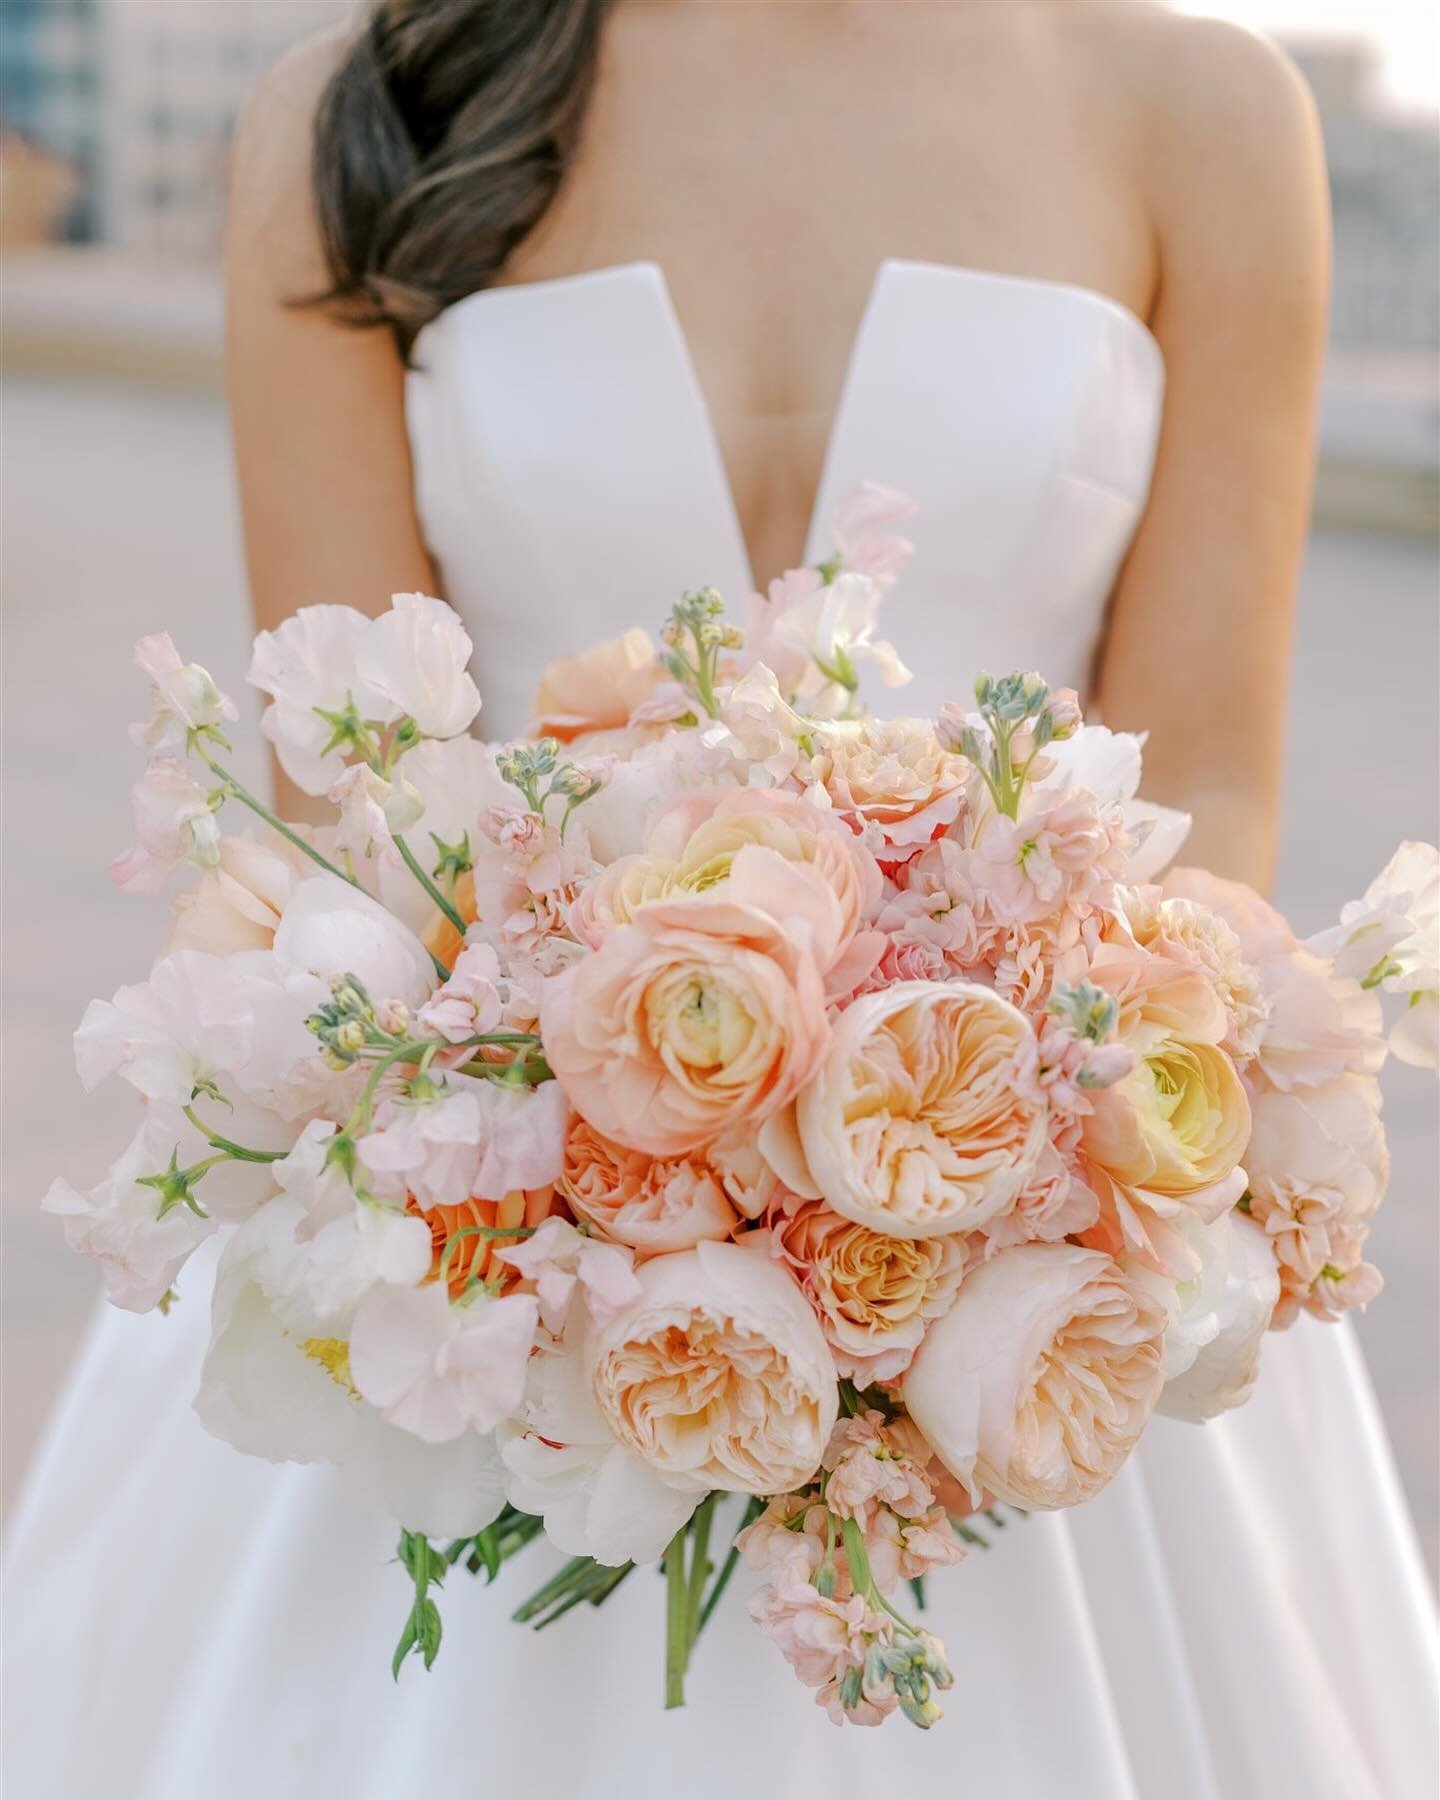 Brides! SAVE this post for your Spring/Summer wedding floral inspiration! A year later and this bouquet is still making waves around the internet. This is a perfect example that you can have color for your wedding and still have a very classic design